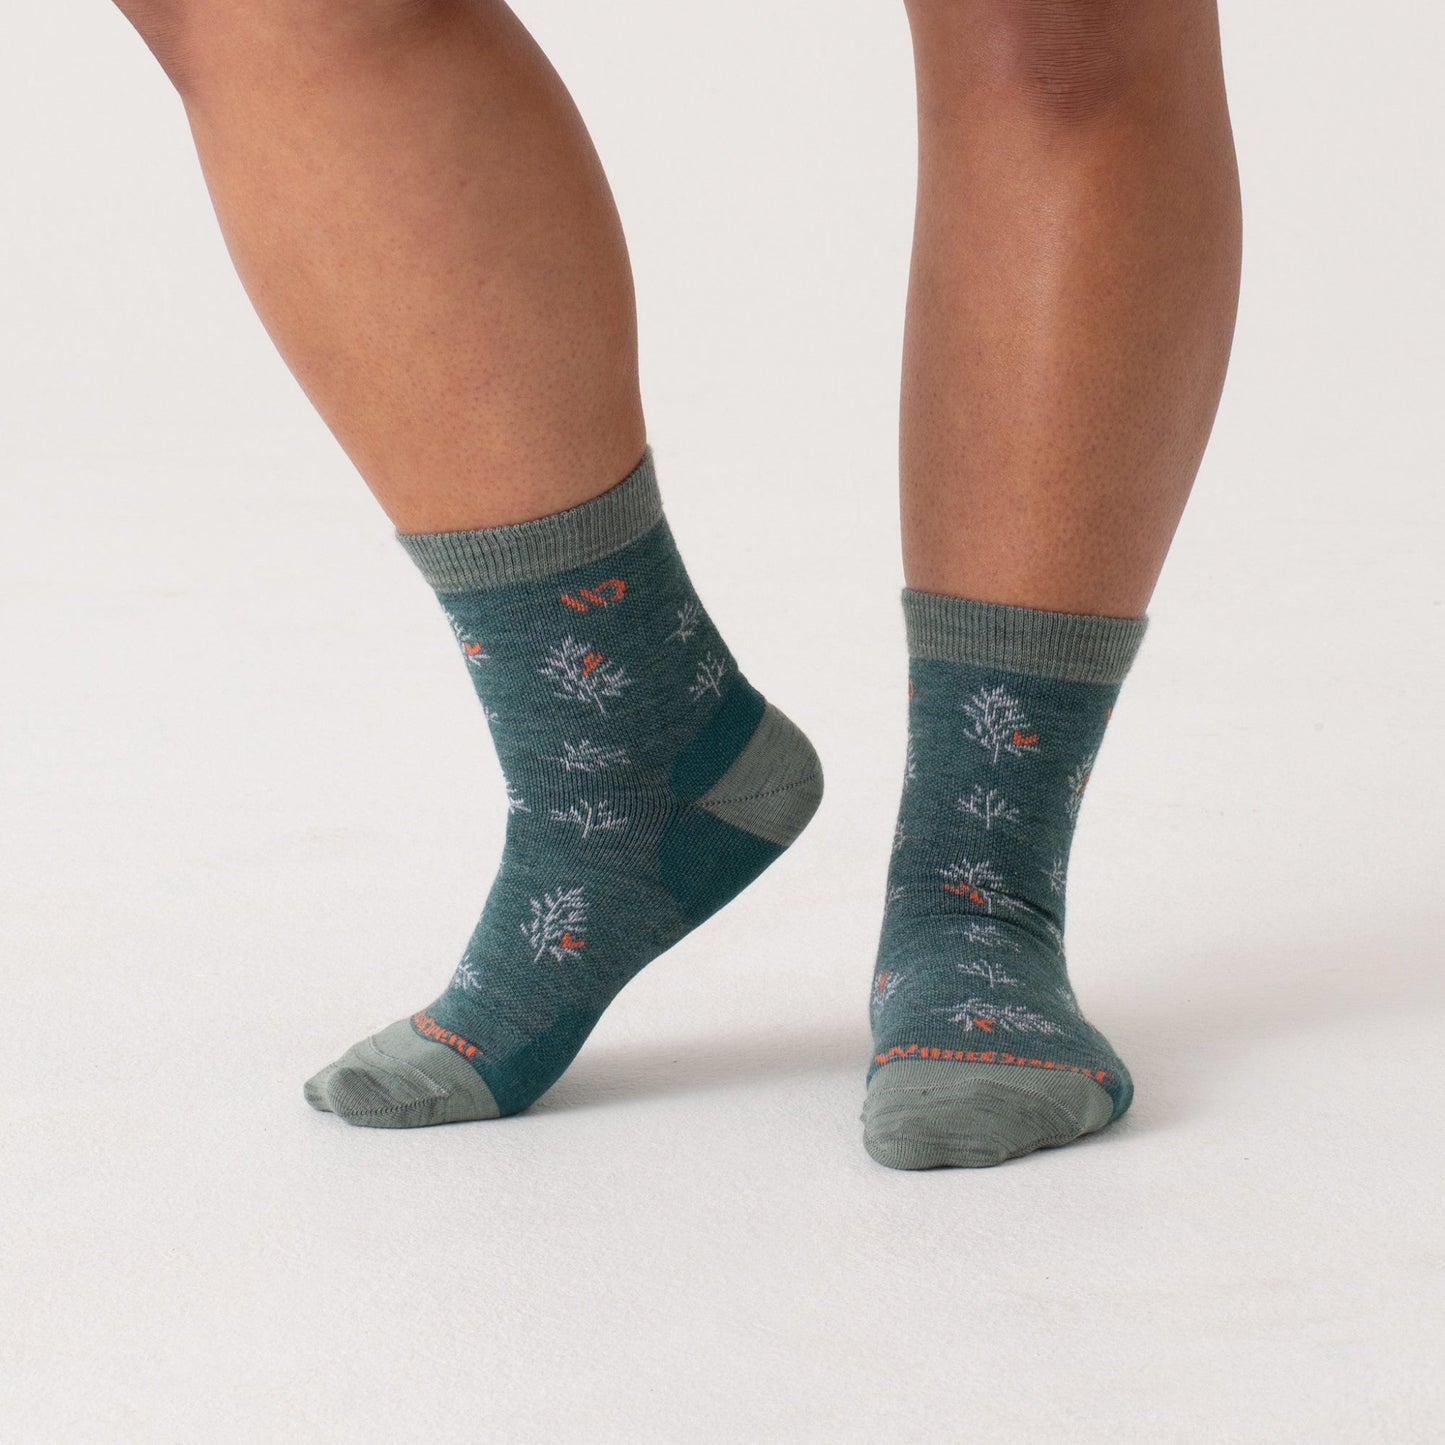 On body of seafoam heel/toe/cuff, teal body, white pattern with orange accents --Light Gray/Teal/Denim/Taupe